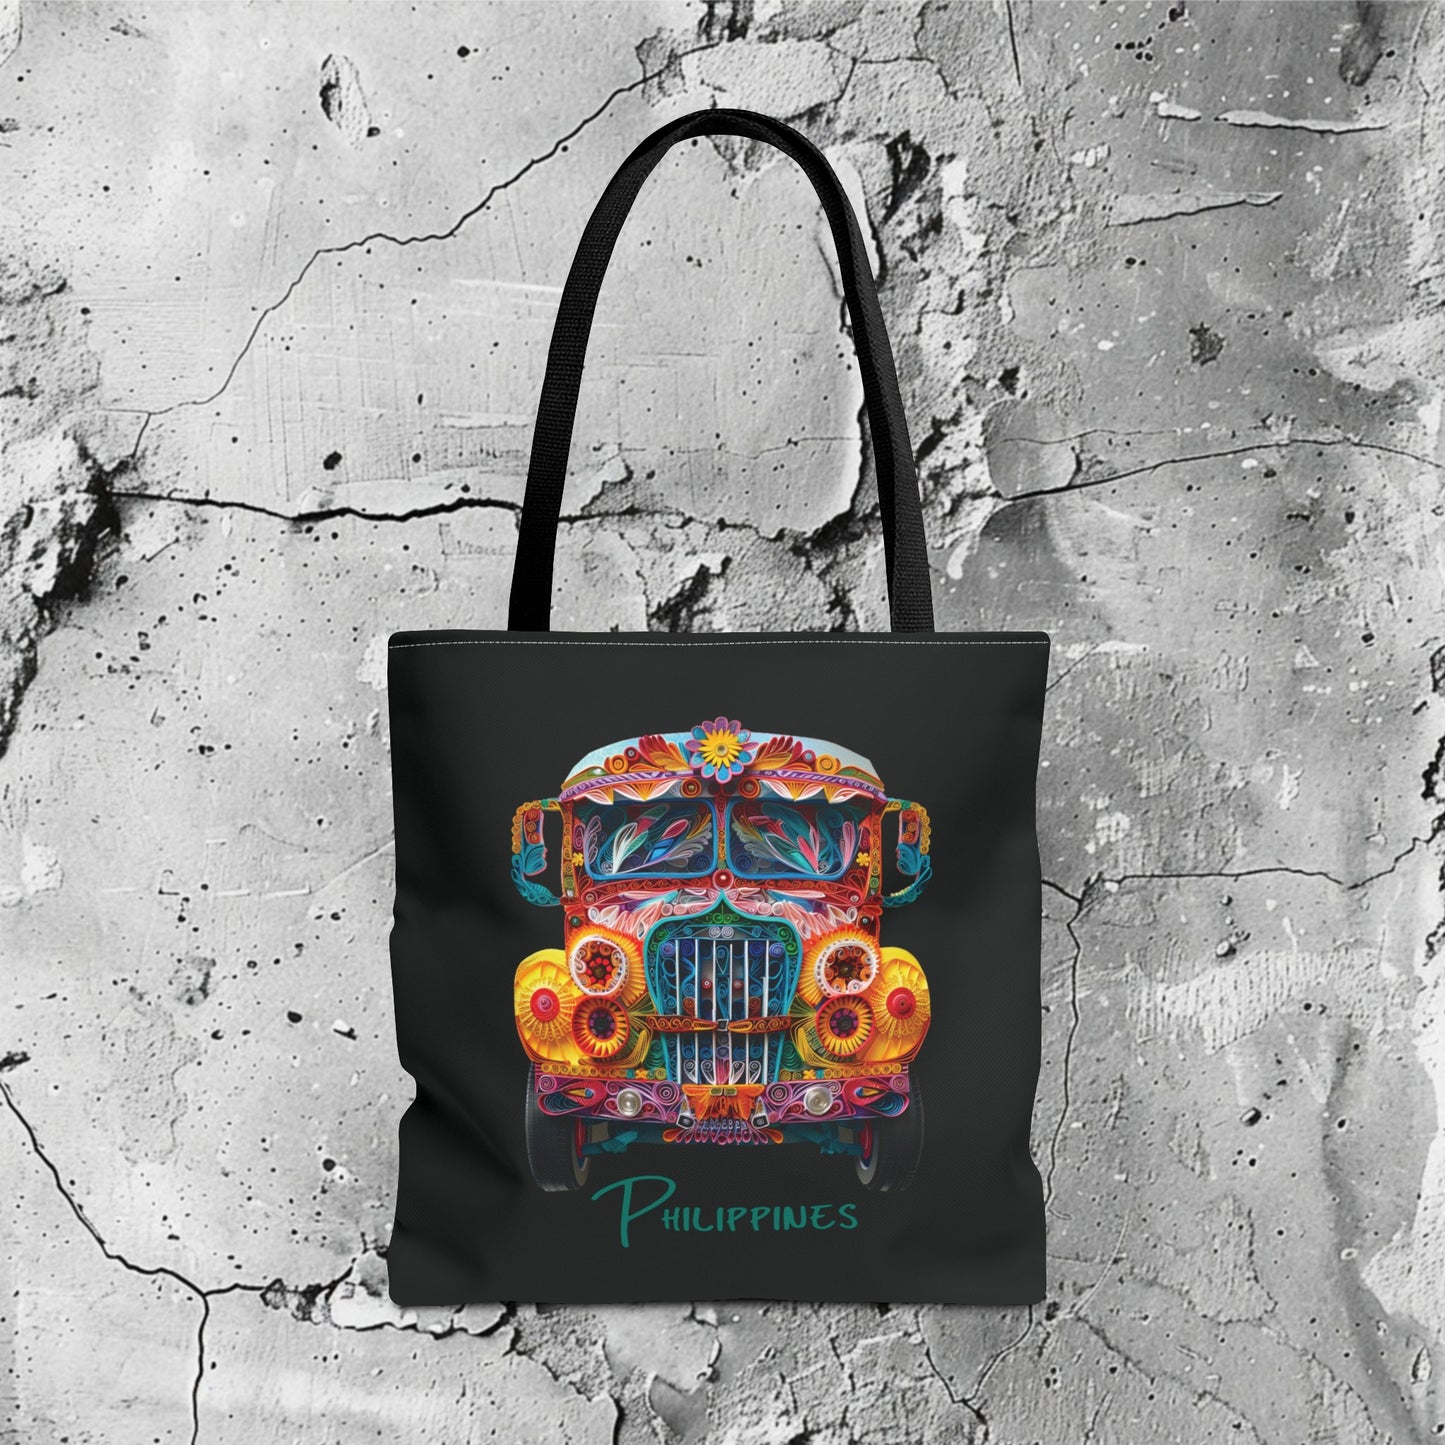 Jeepney Philippines Tote Bag